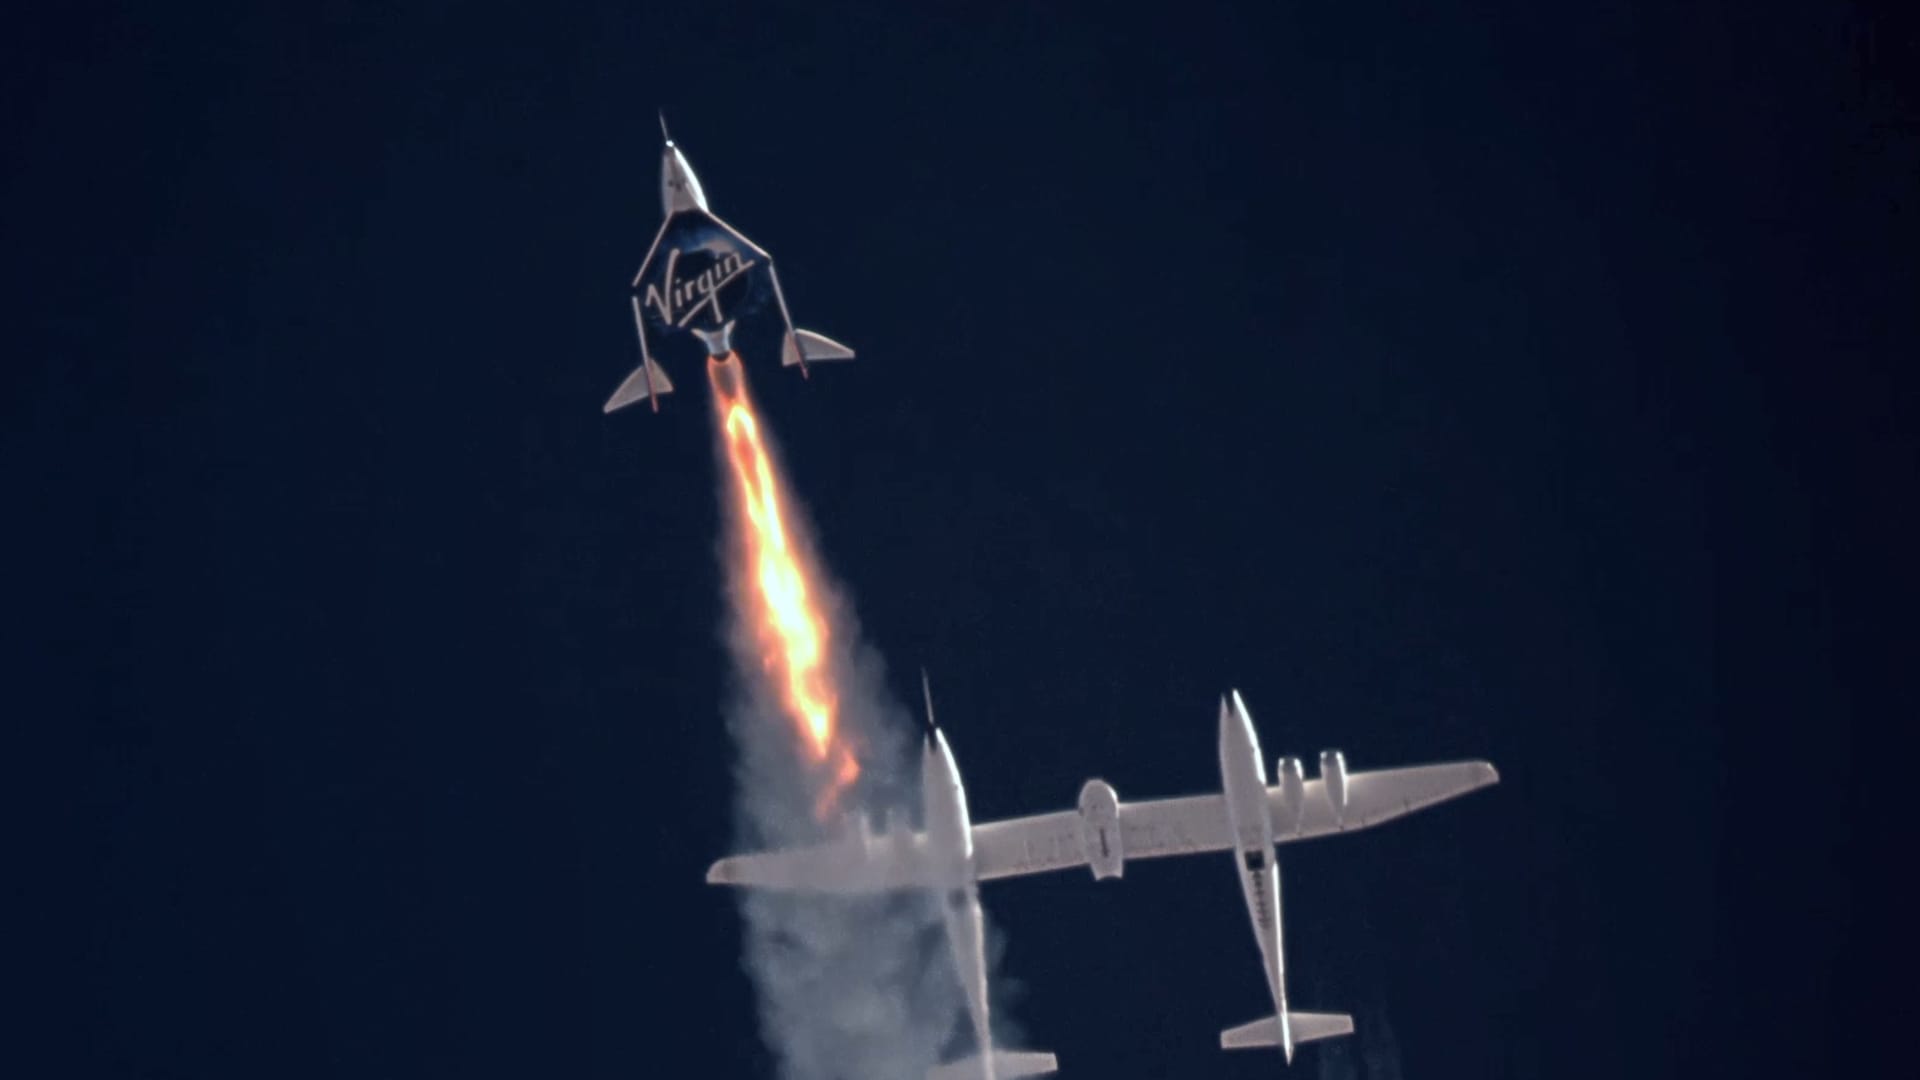 Virgin Galactic targets May 25 for first spaceflight since Richard Branson’s trip